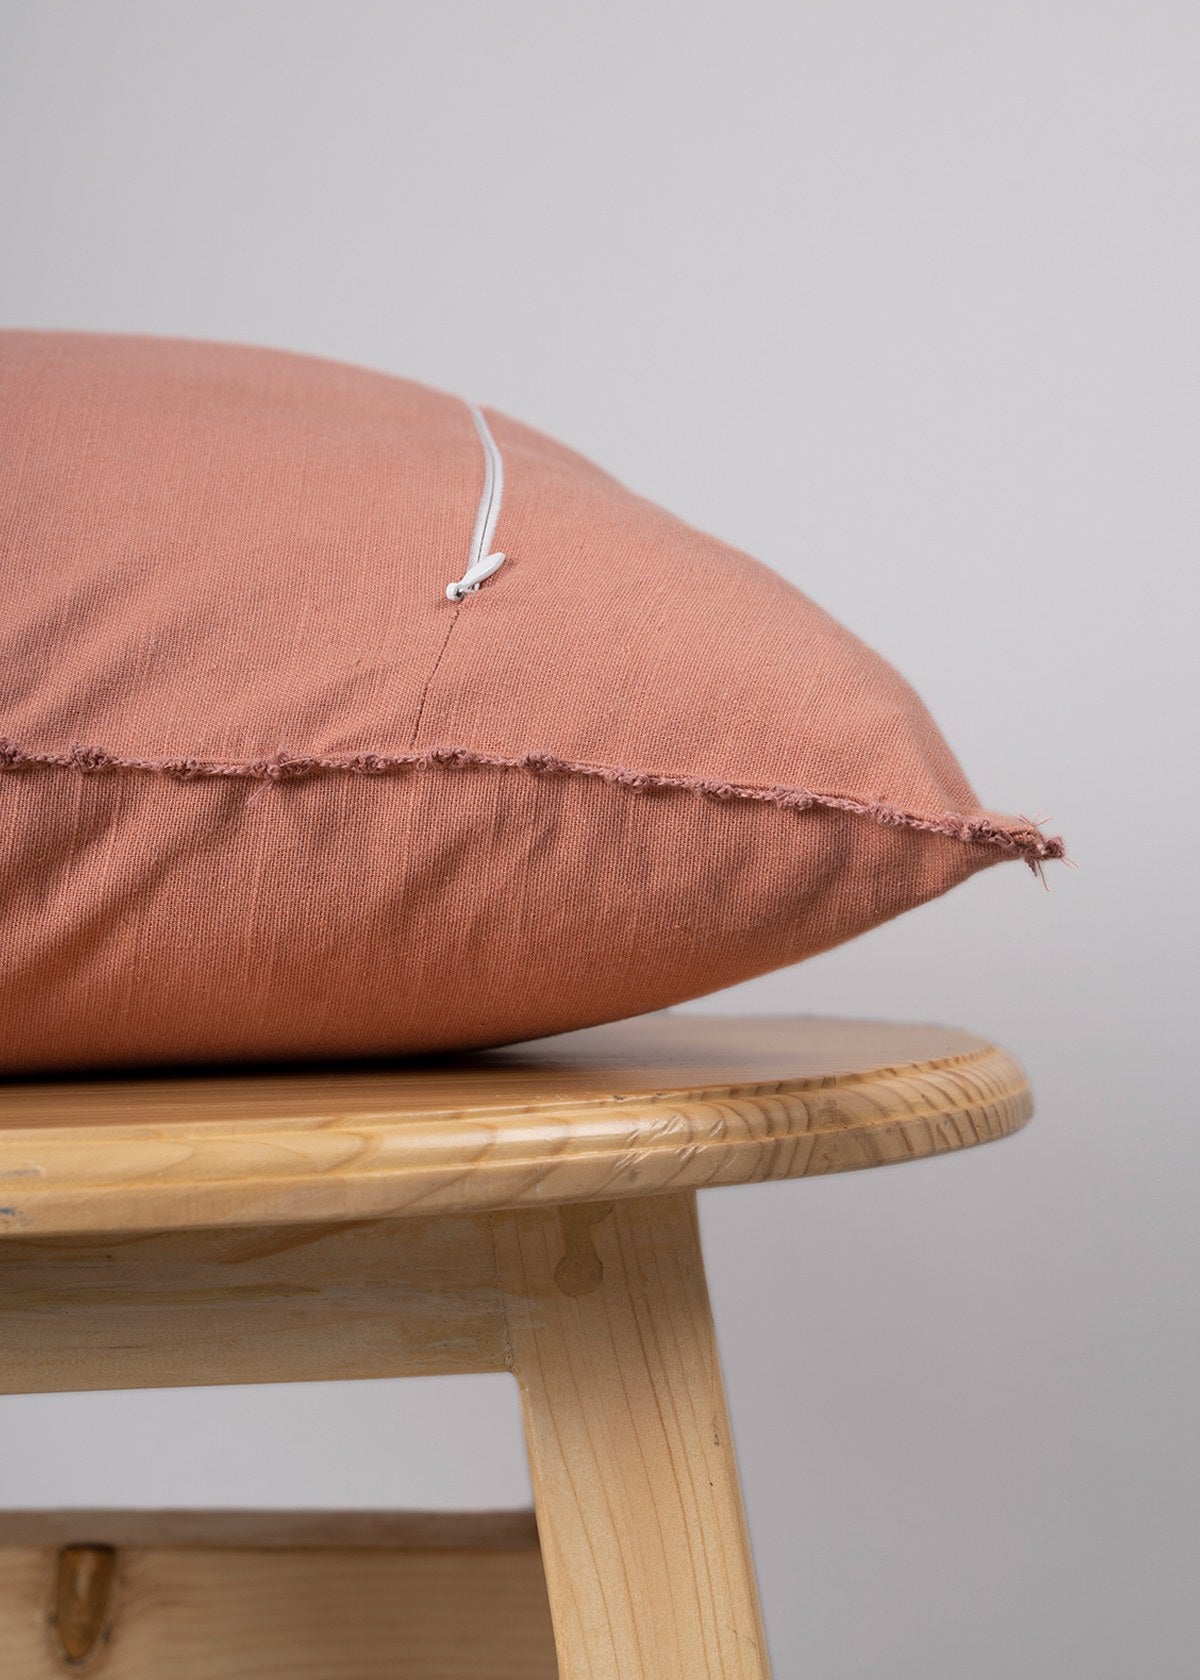 Solid 100% cotton customisable cushion cover for sofa - Rust